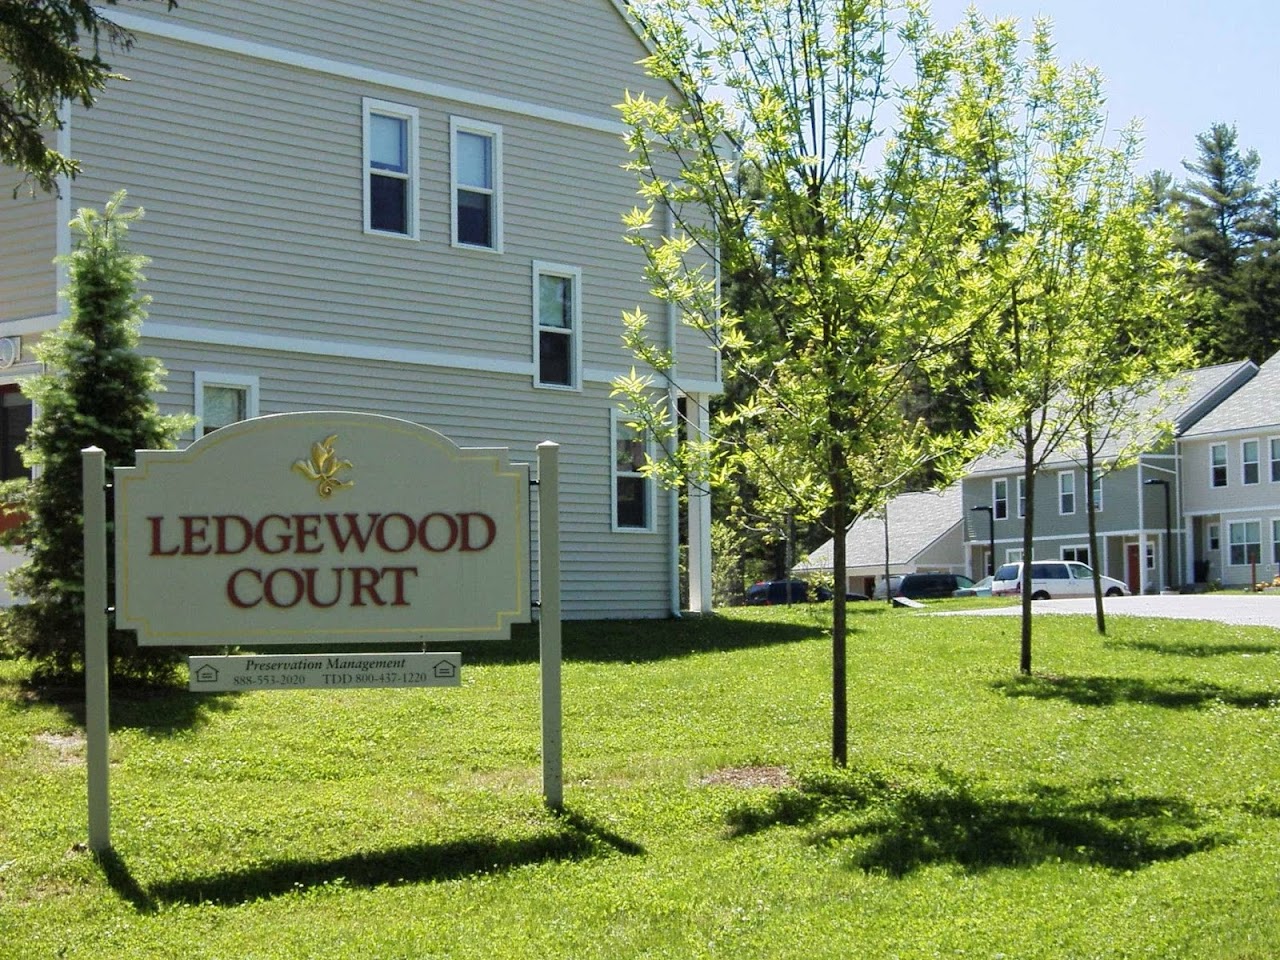 Photo of LEDGEWOOD COURT. Affordable housing located at 207 LEDGEWOOD CT DR DAMARISCOTTA, ME 04543